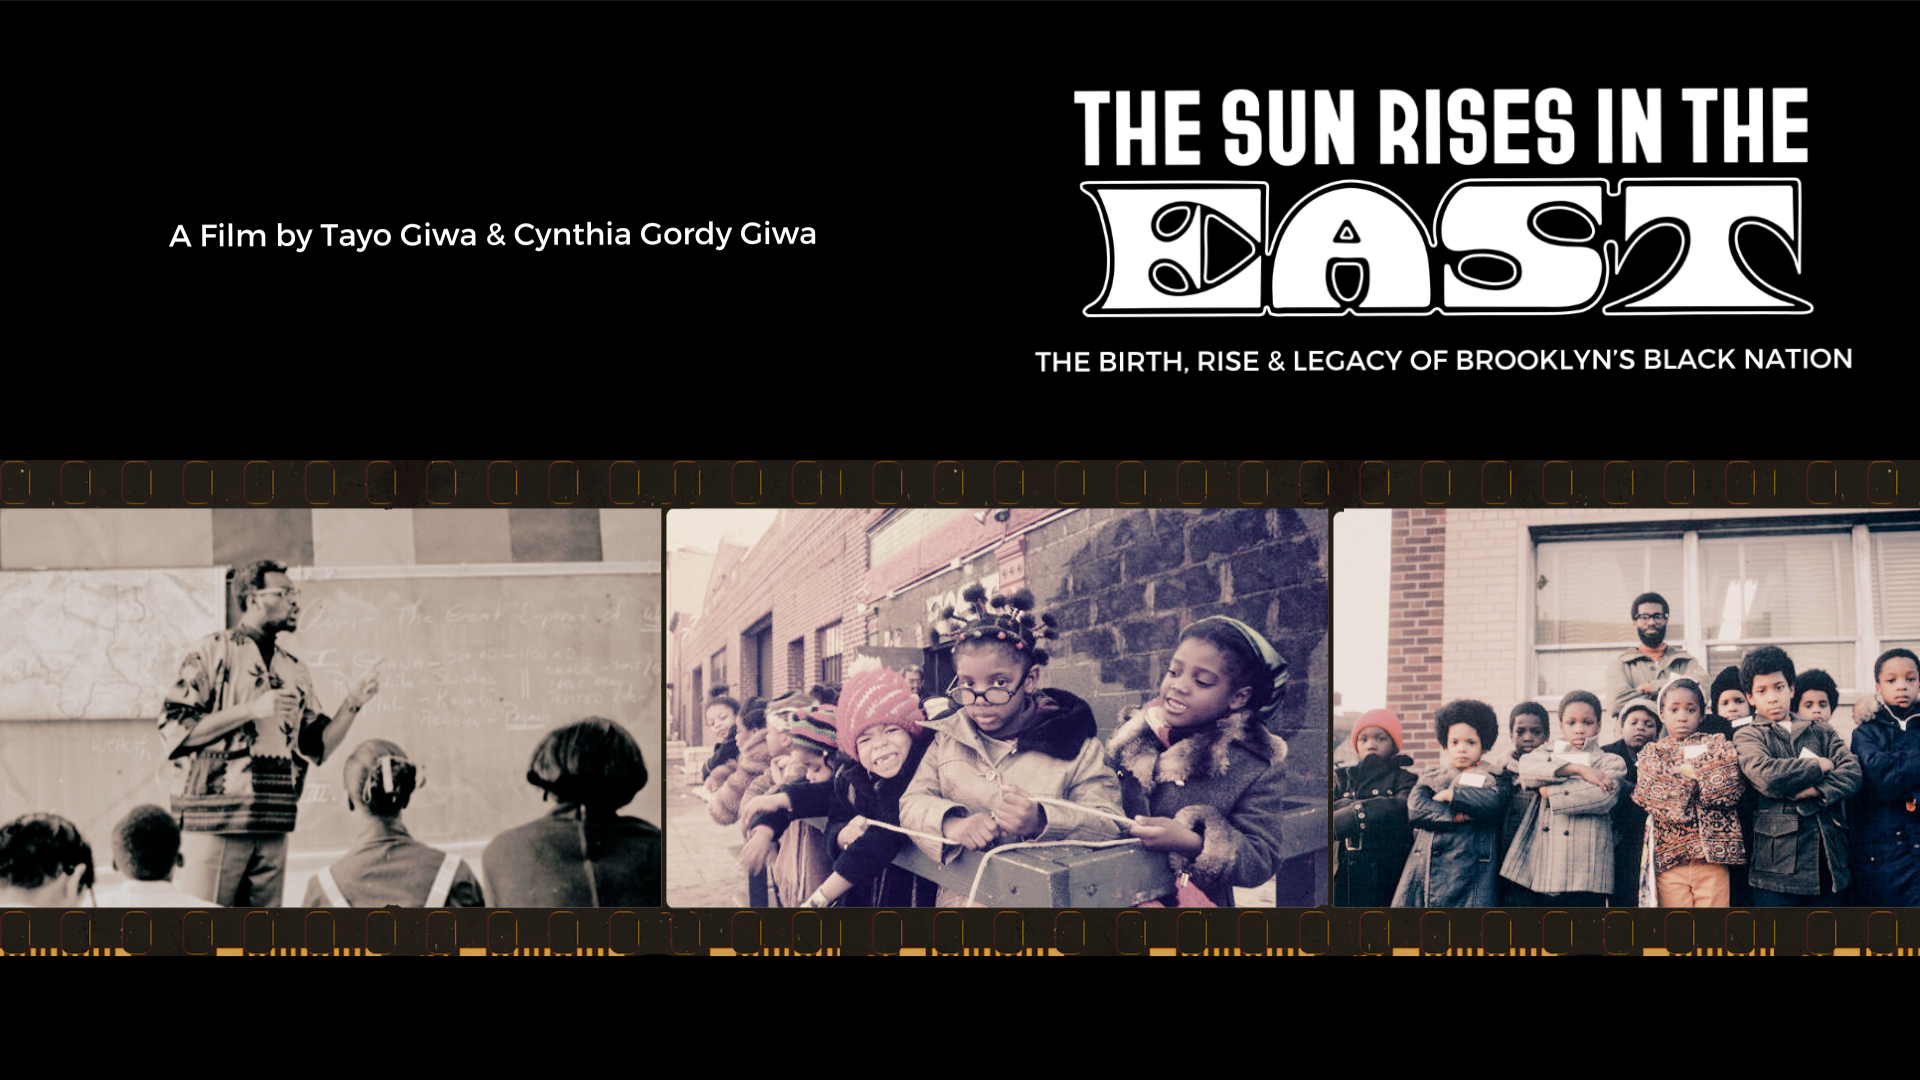 The title "The Sun Rises in the East" and images of Black students and teachers from the 70s on a black background.